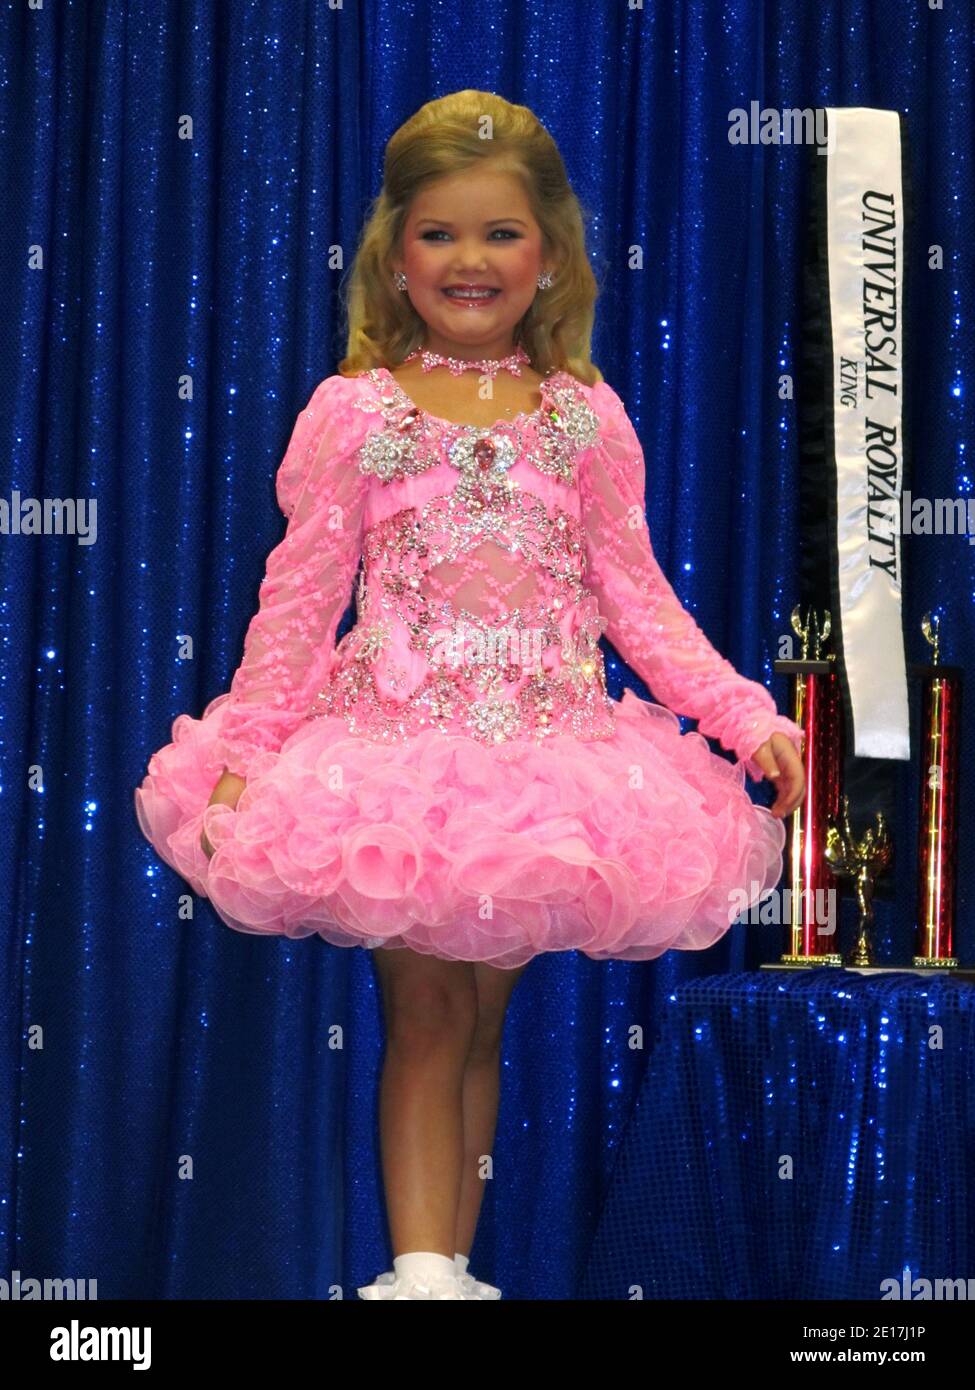 Pageant contestant poses stage during the Universal Royalty in Texas, filmed during the 4th season of TLC's 'Toddlers & Tiaras'. The new premieres on June 15, 2011. Photo